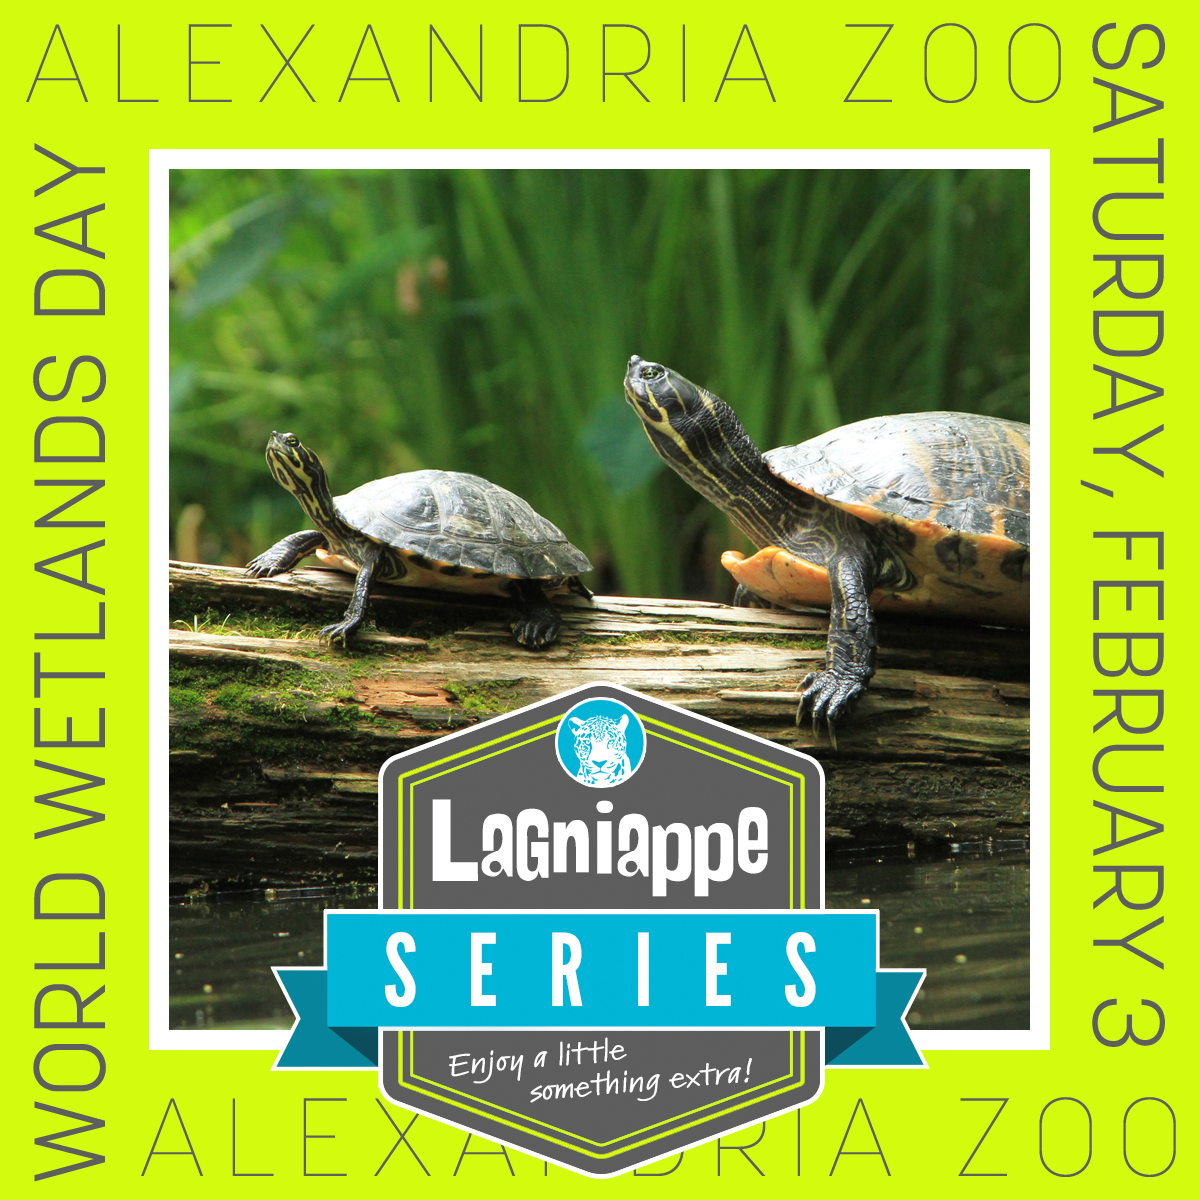 Lagniappe Series logo with turtles